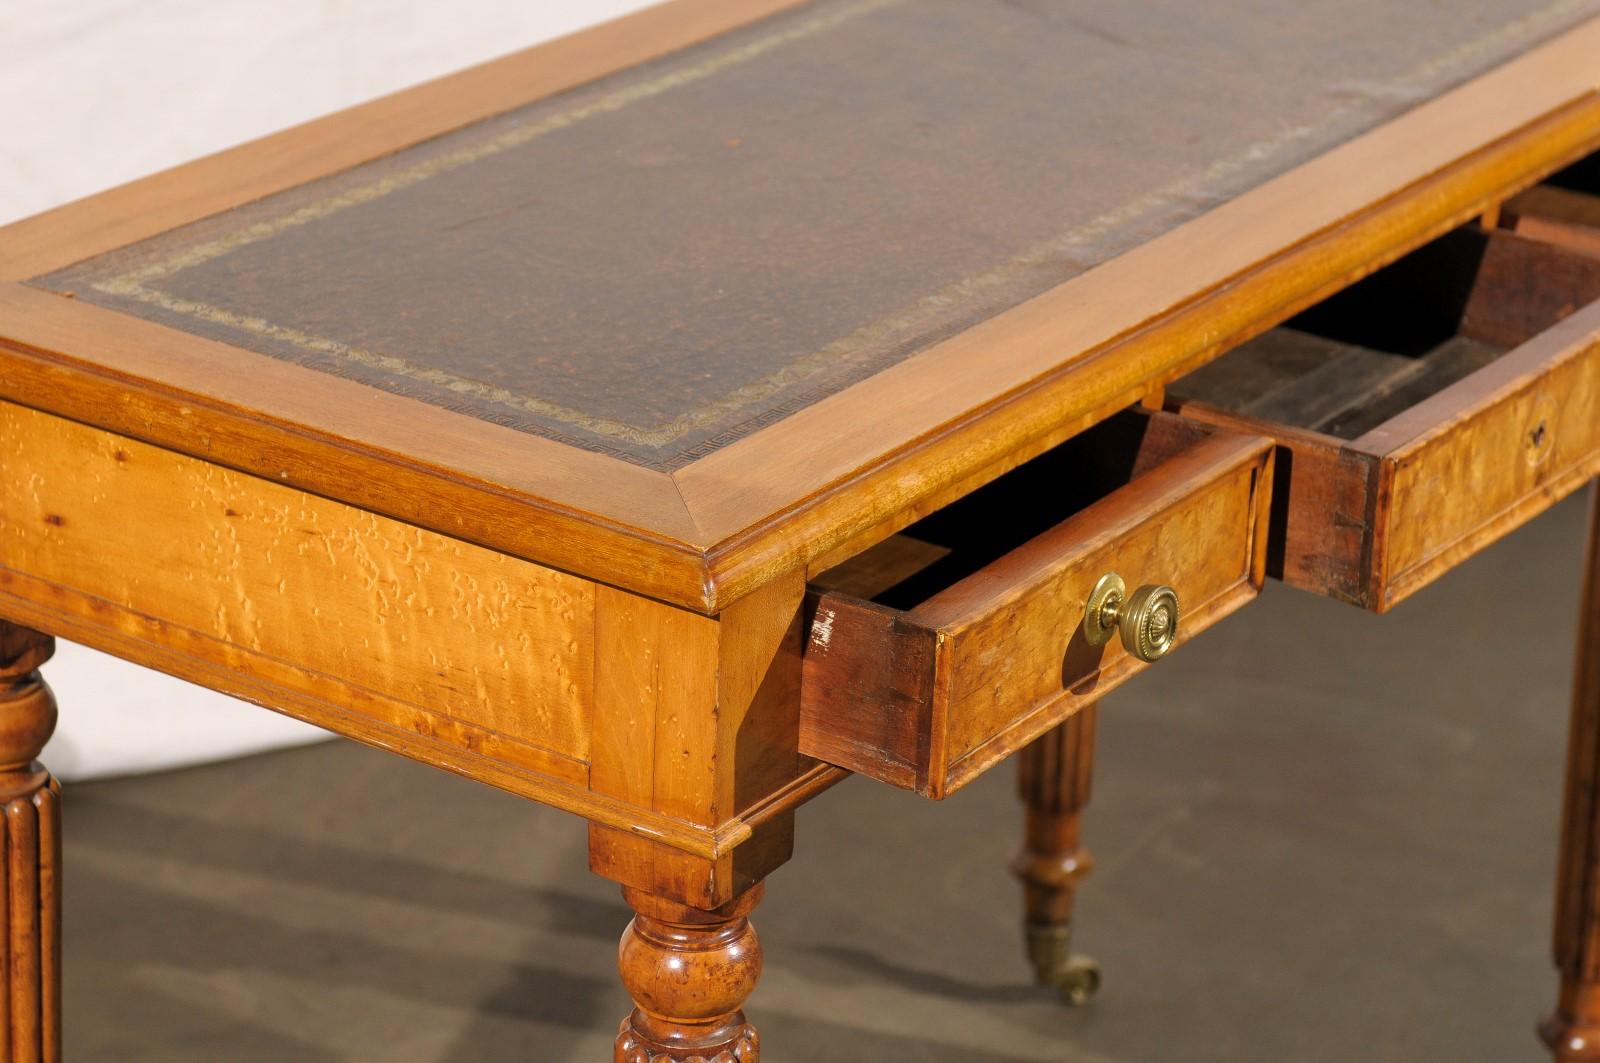 William IV bird's-eye maple writing table desk with leather top, three drawers
Measures: 41.75